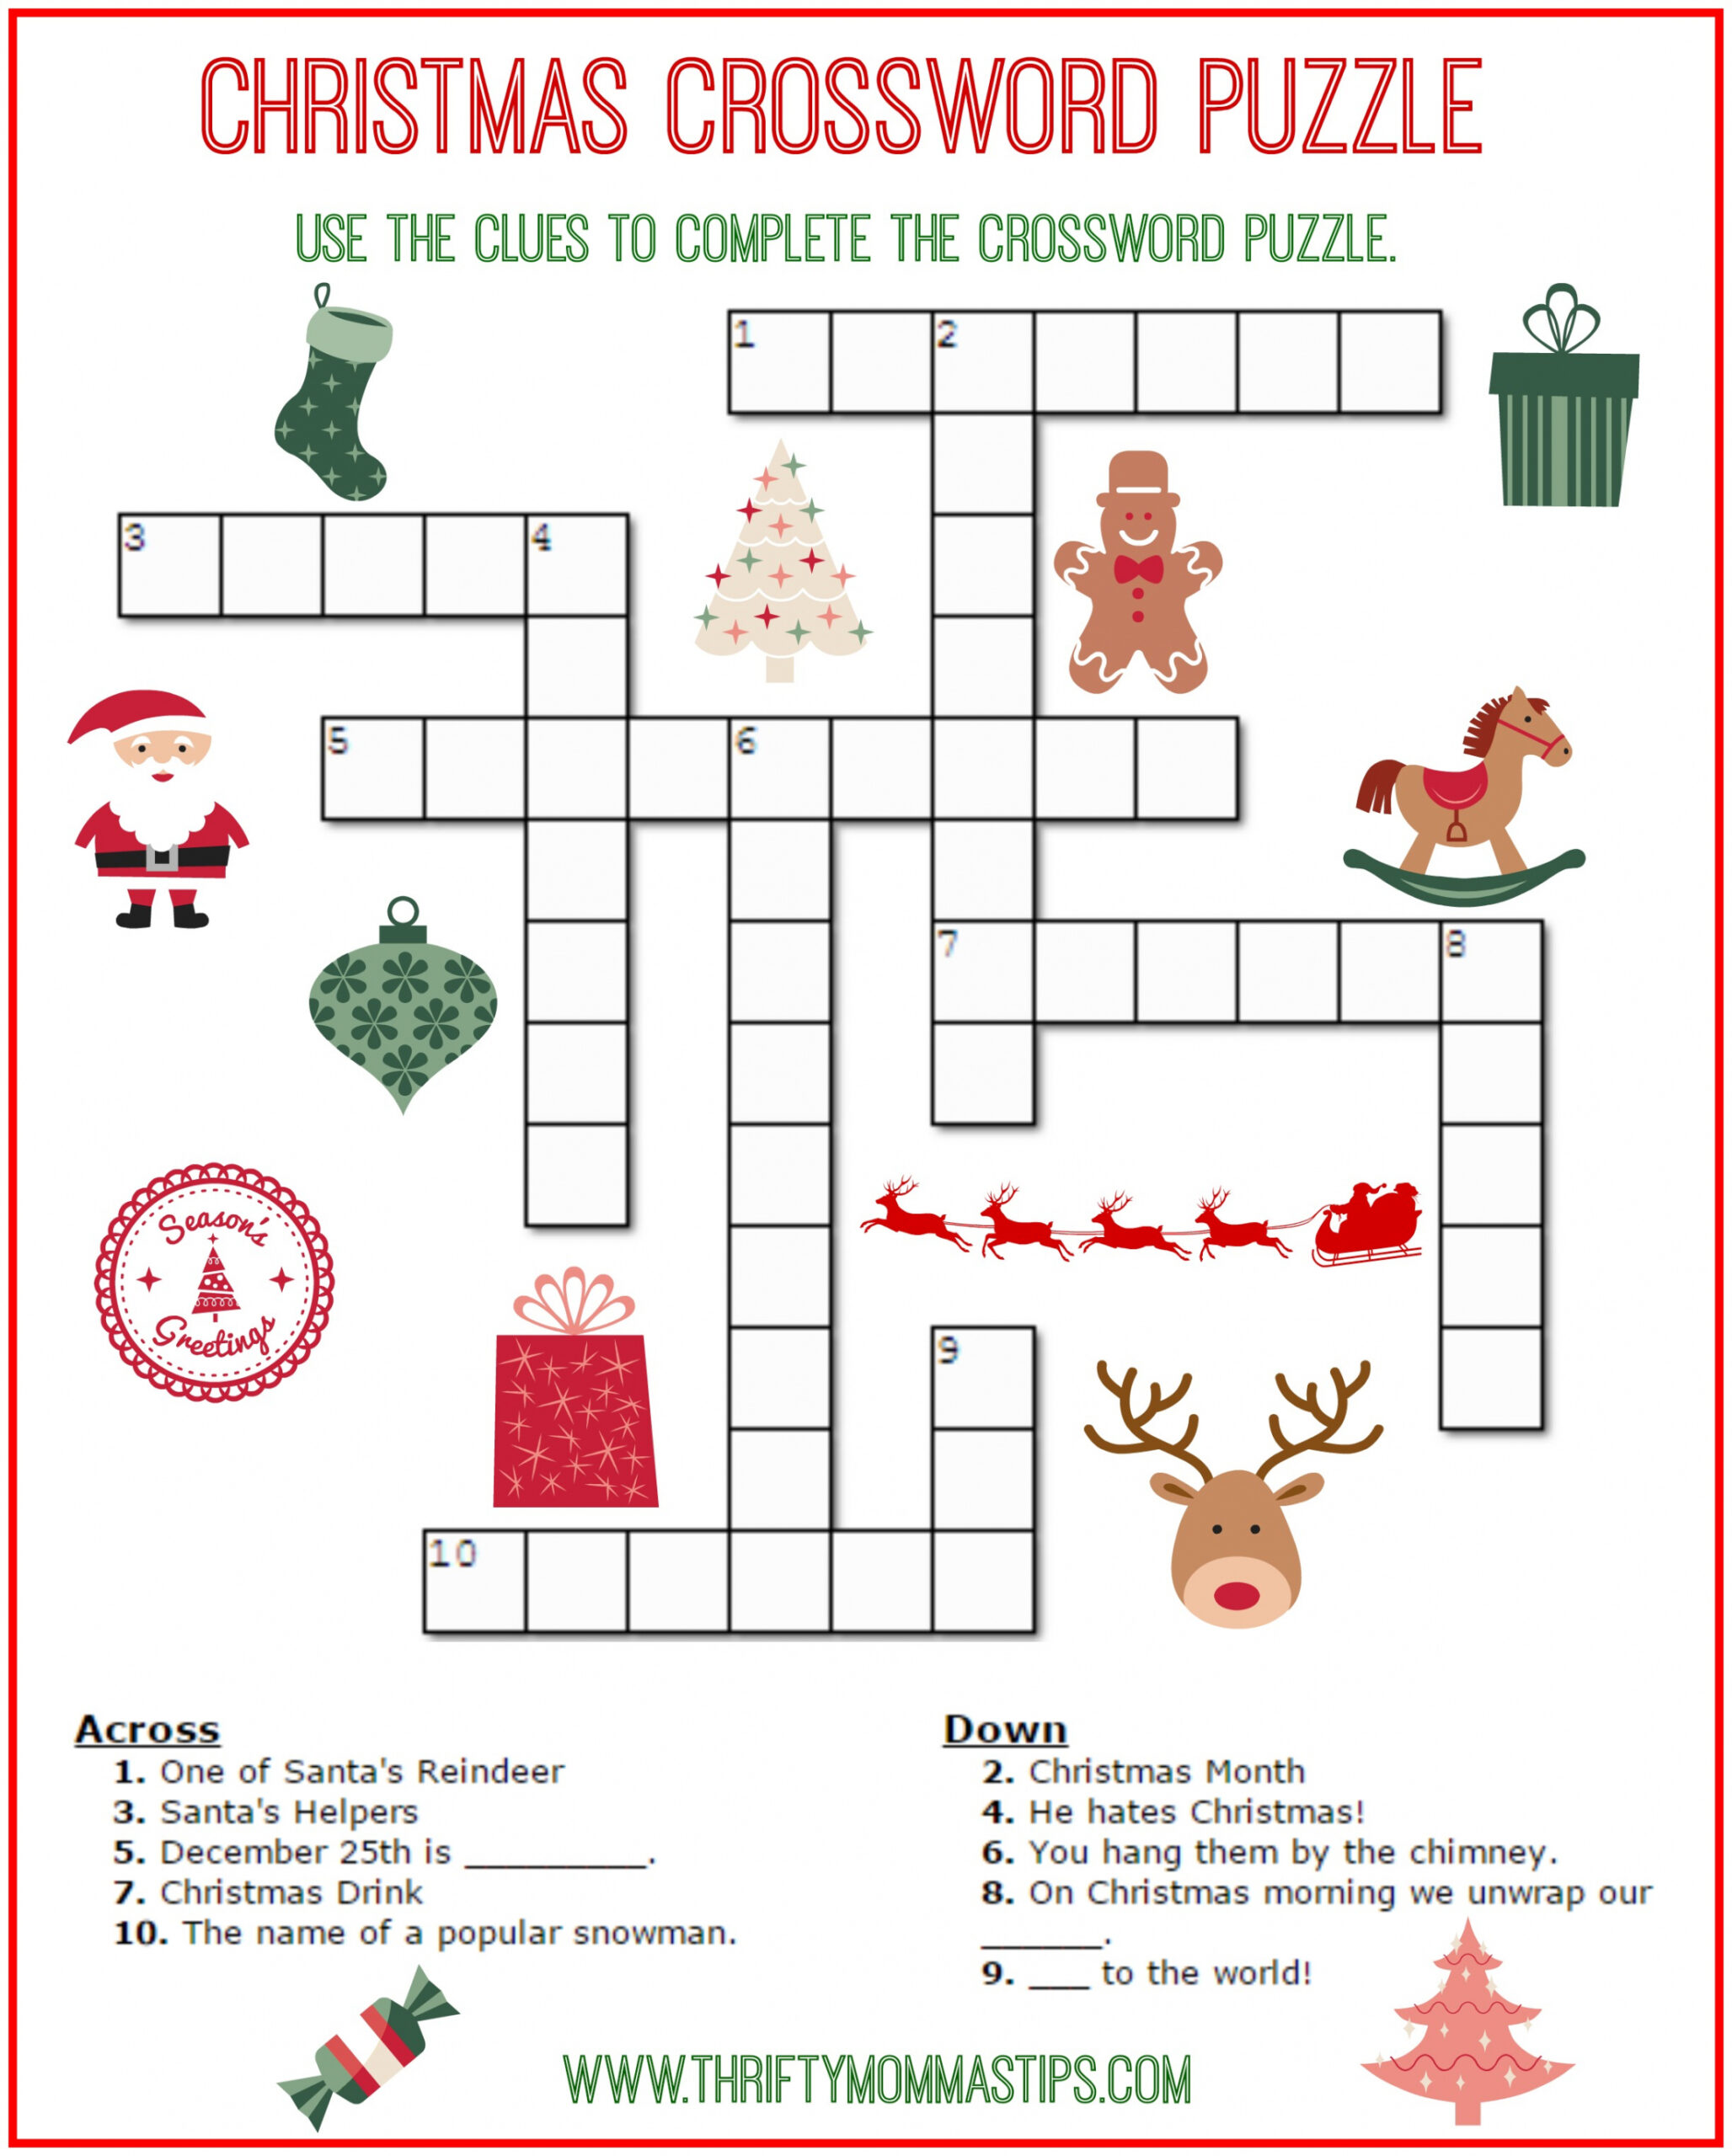 Christmas Crossword Puzzle Printable - Thrifty Momma